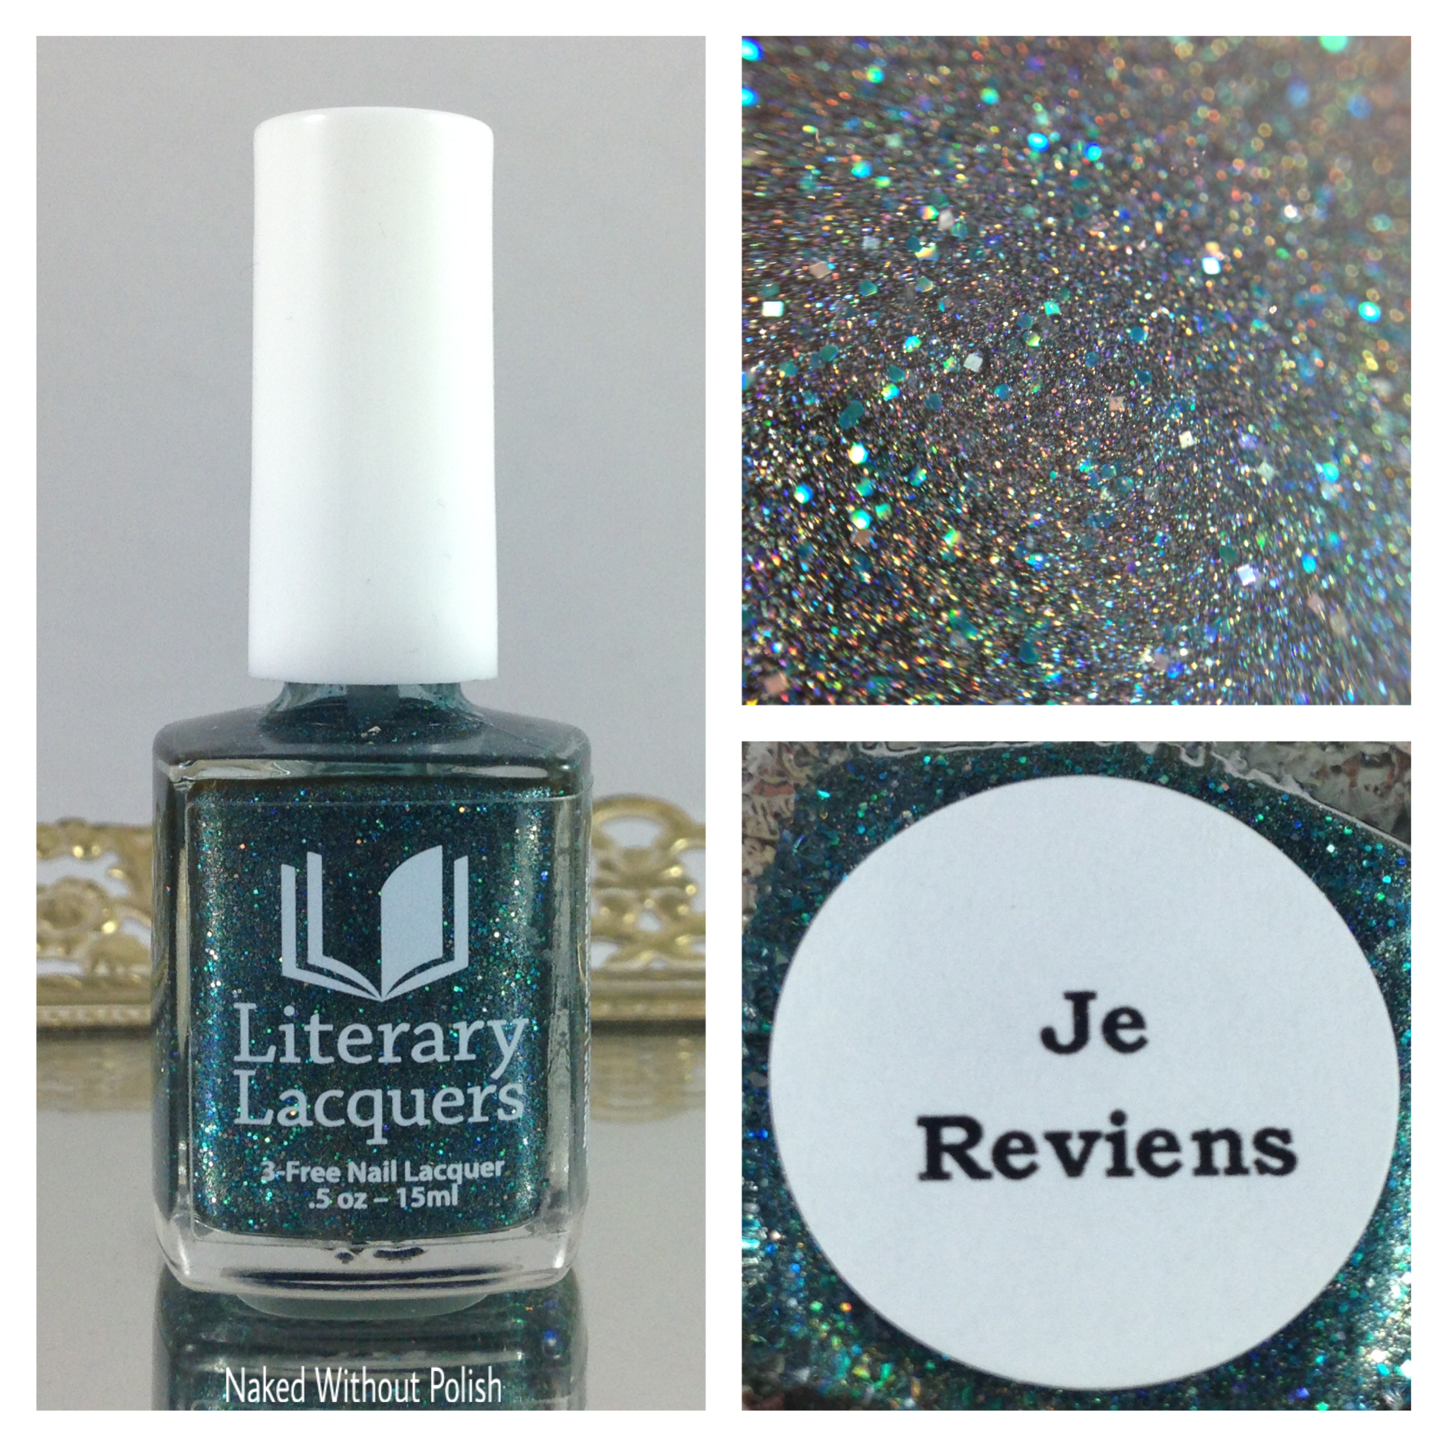 Literary-Lacquers-Je-Reviens-1